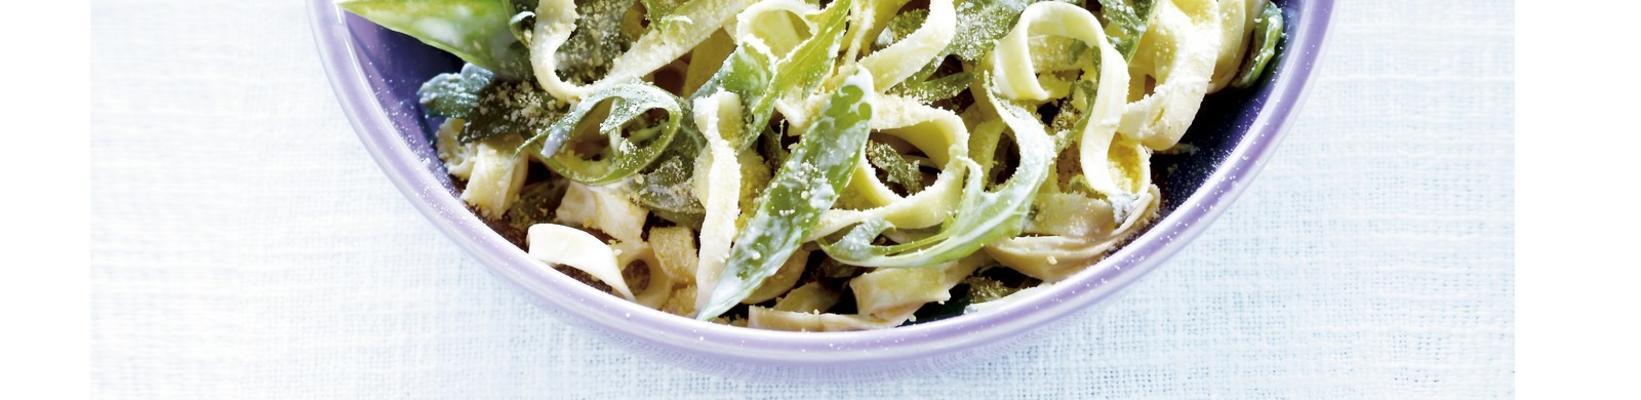 pasta with snow peas, lemon and fresh cheese